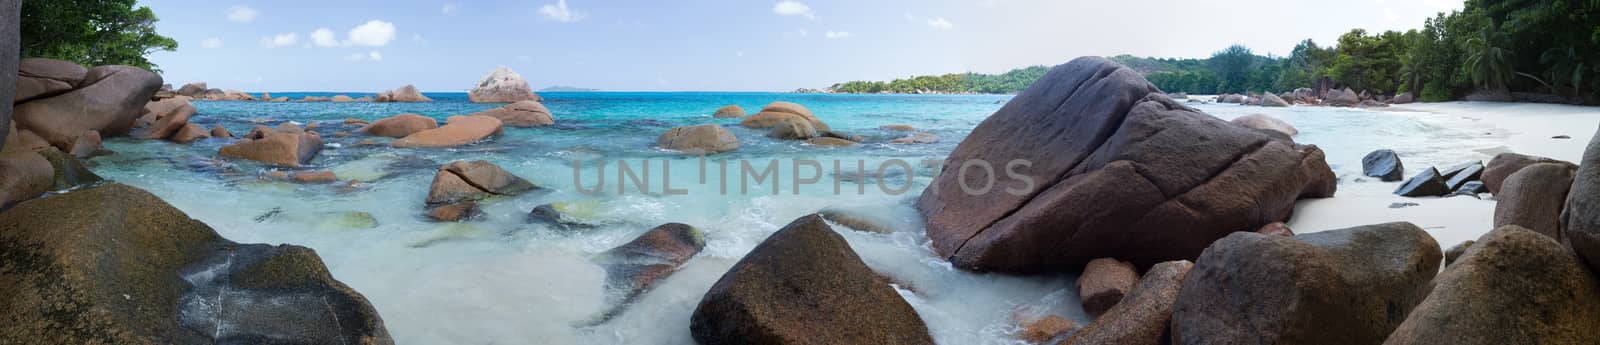 The beach of the Seychelles with blue water and stones by 25ehaag6